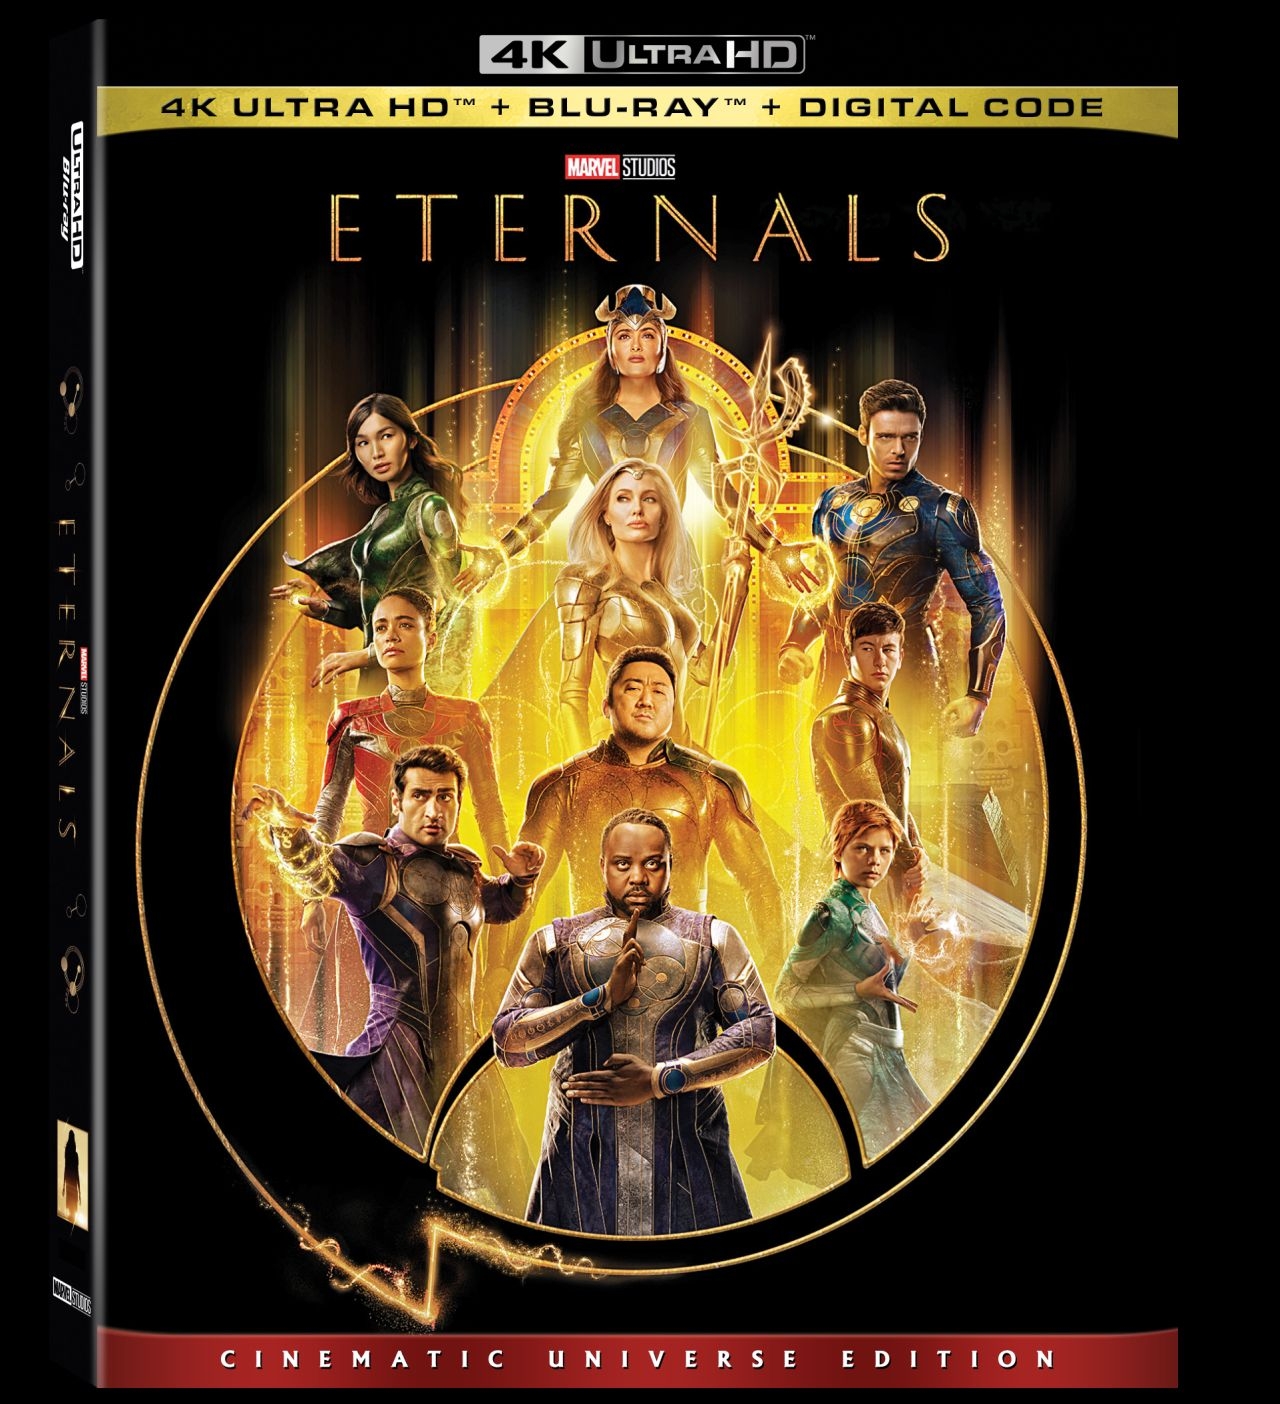 Marvel's 'Eternals' Coming to Digital and Blu-Ray